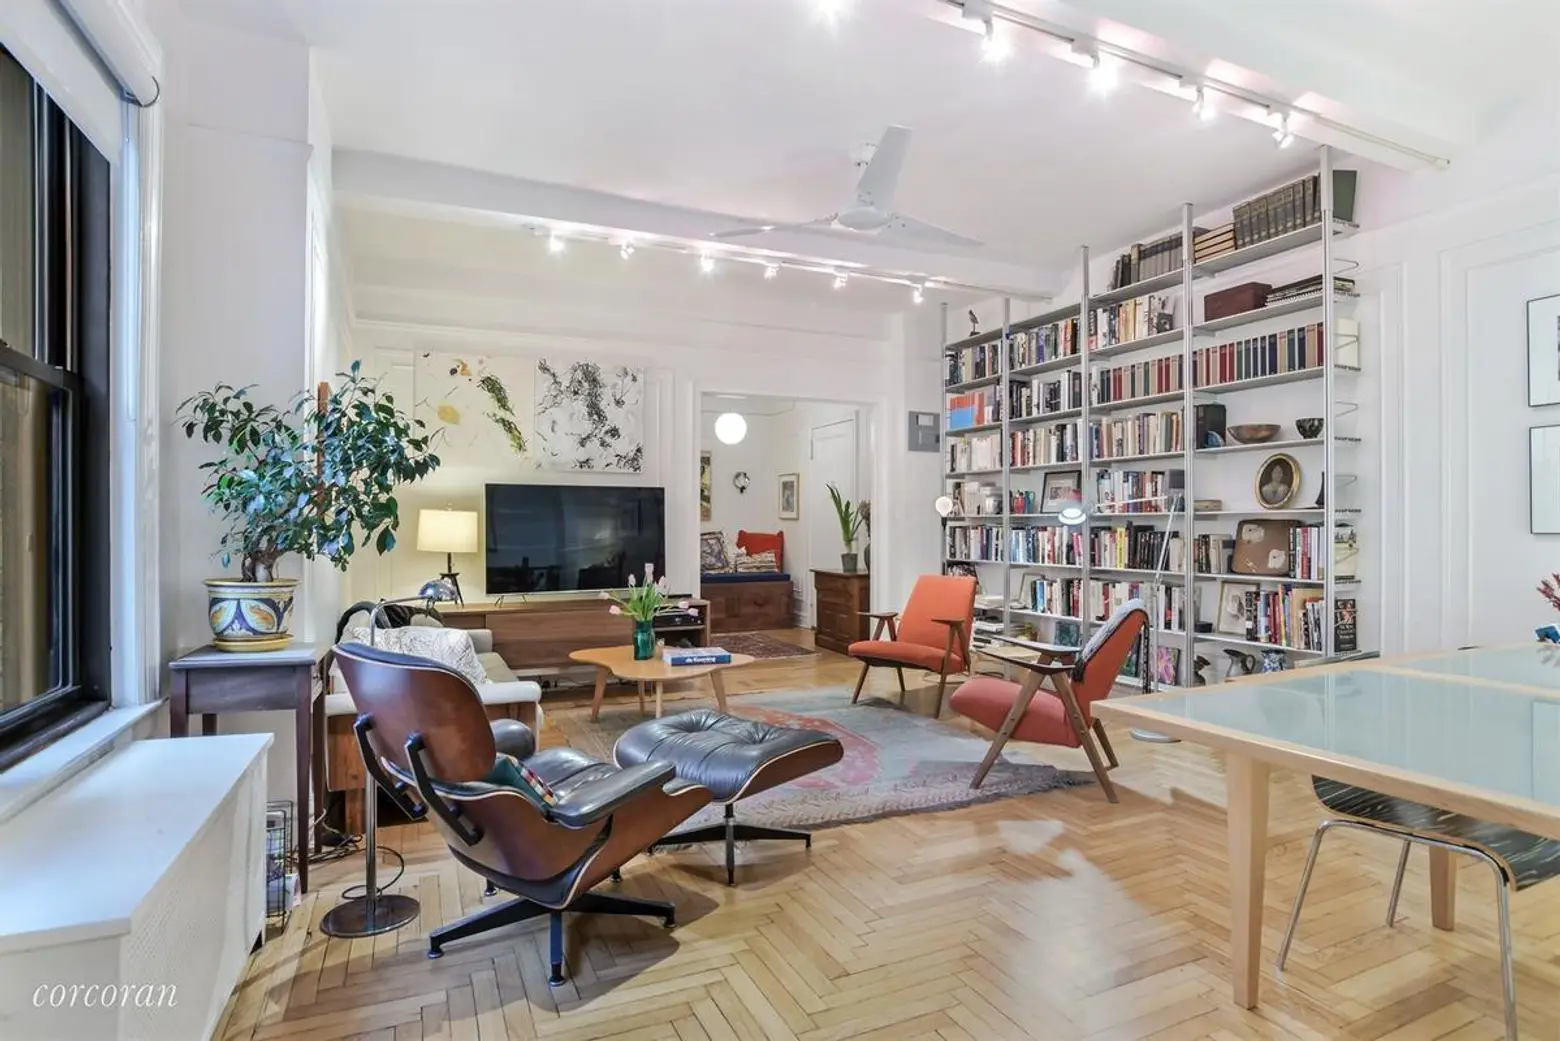 $749K co-op in Prospect Heights has prewar charm with customized touches